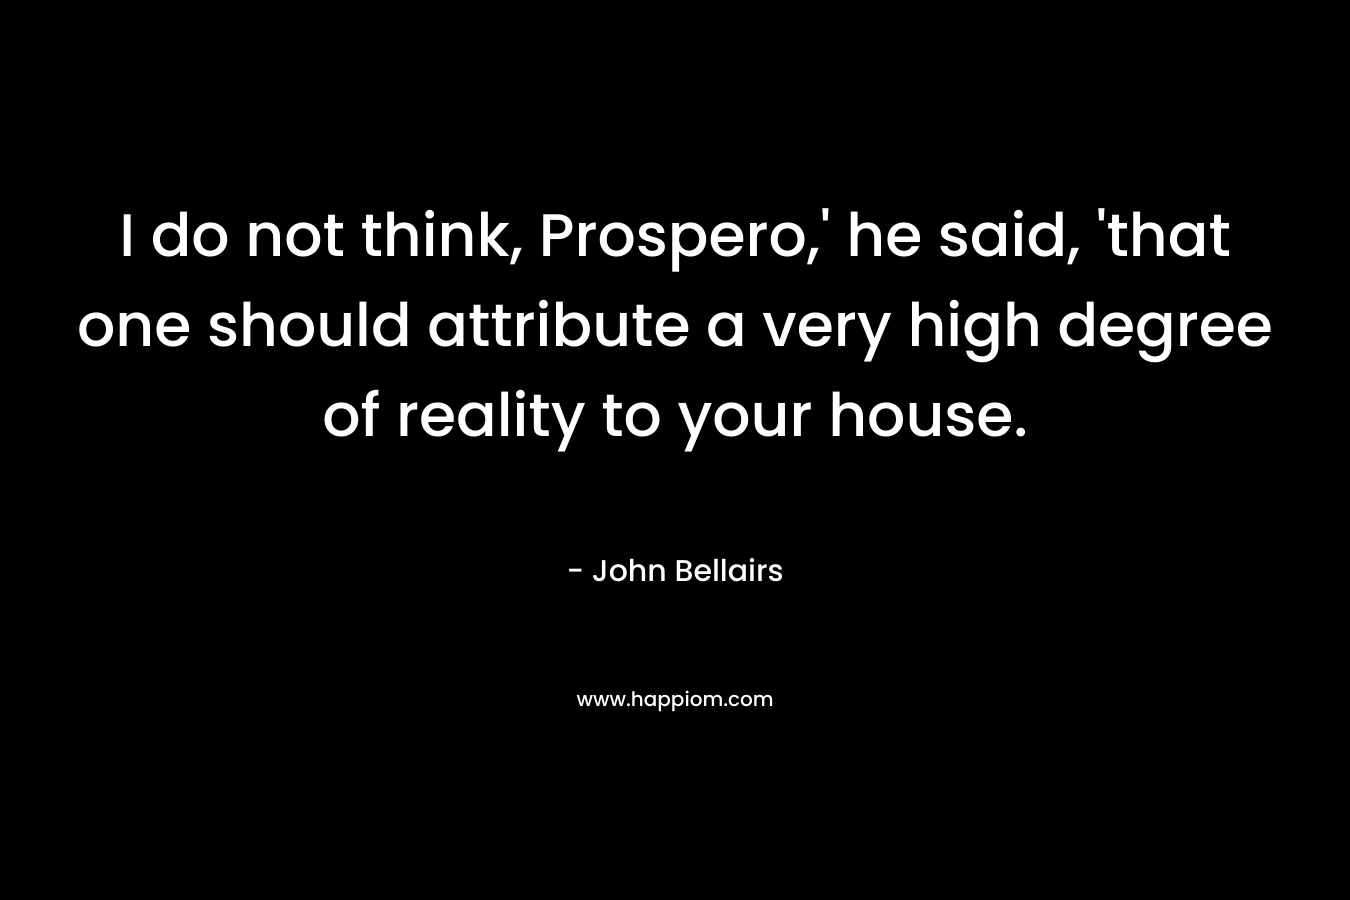 I do not think, Prospero,’ he said, ‘that one should attribute a very high degree of reality to your house. – John Bellairs